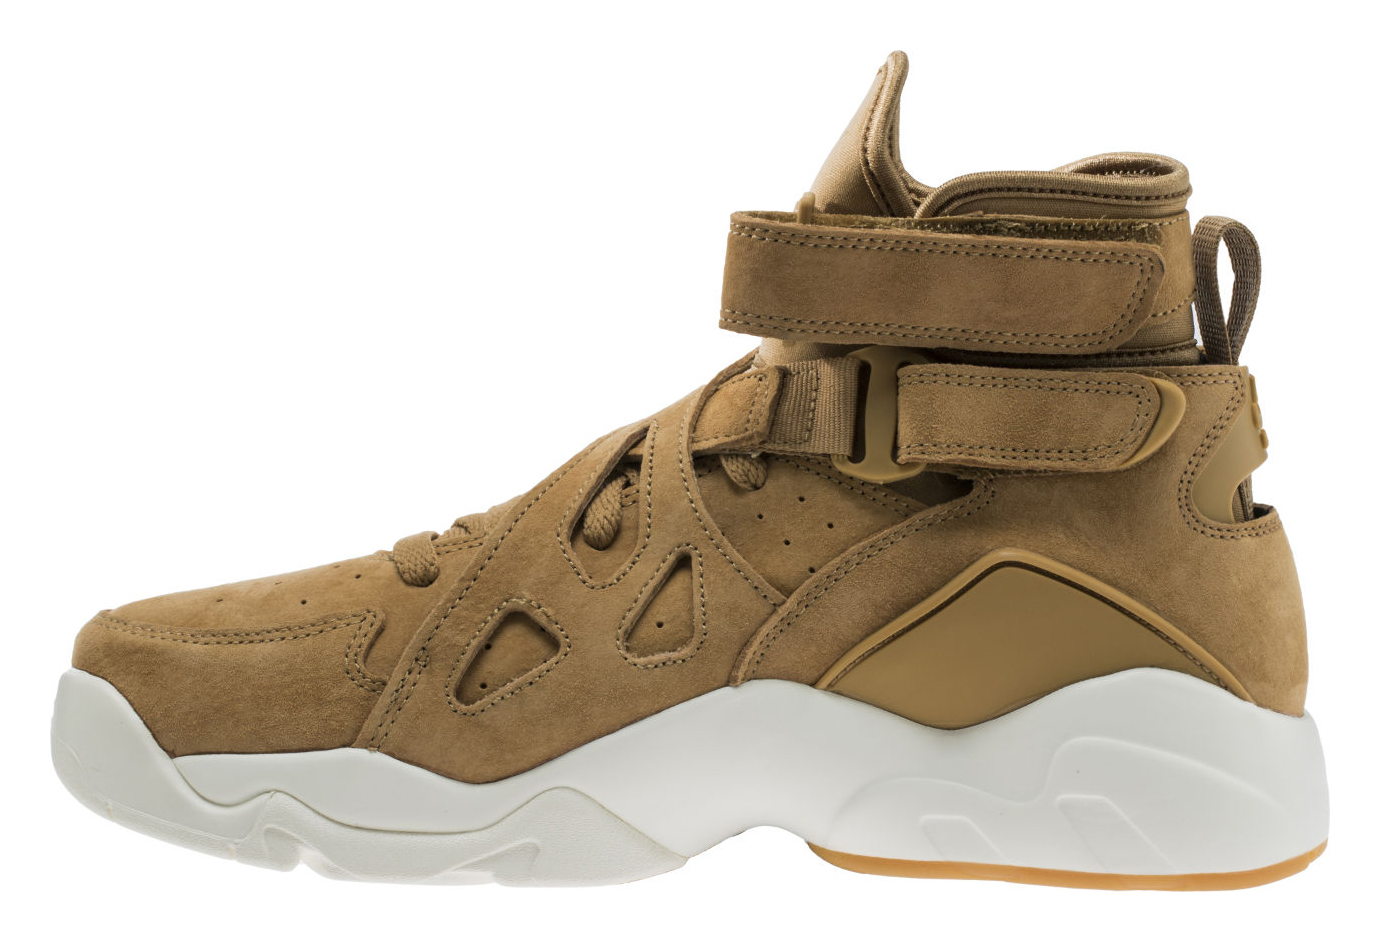 Wheat Nike Air Unlimited 889013-200 Medial